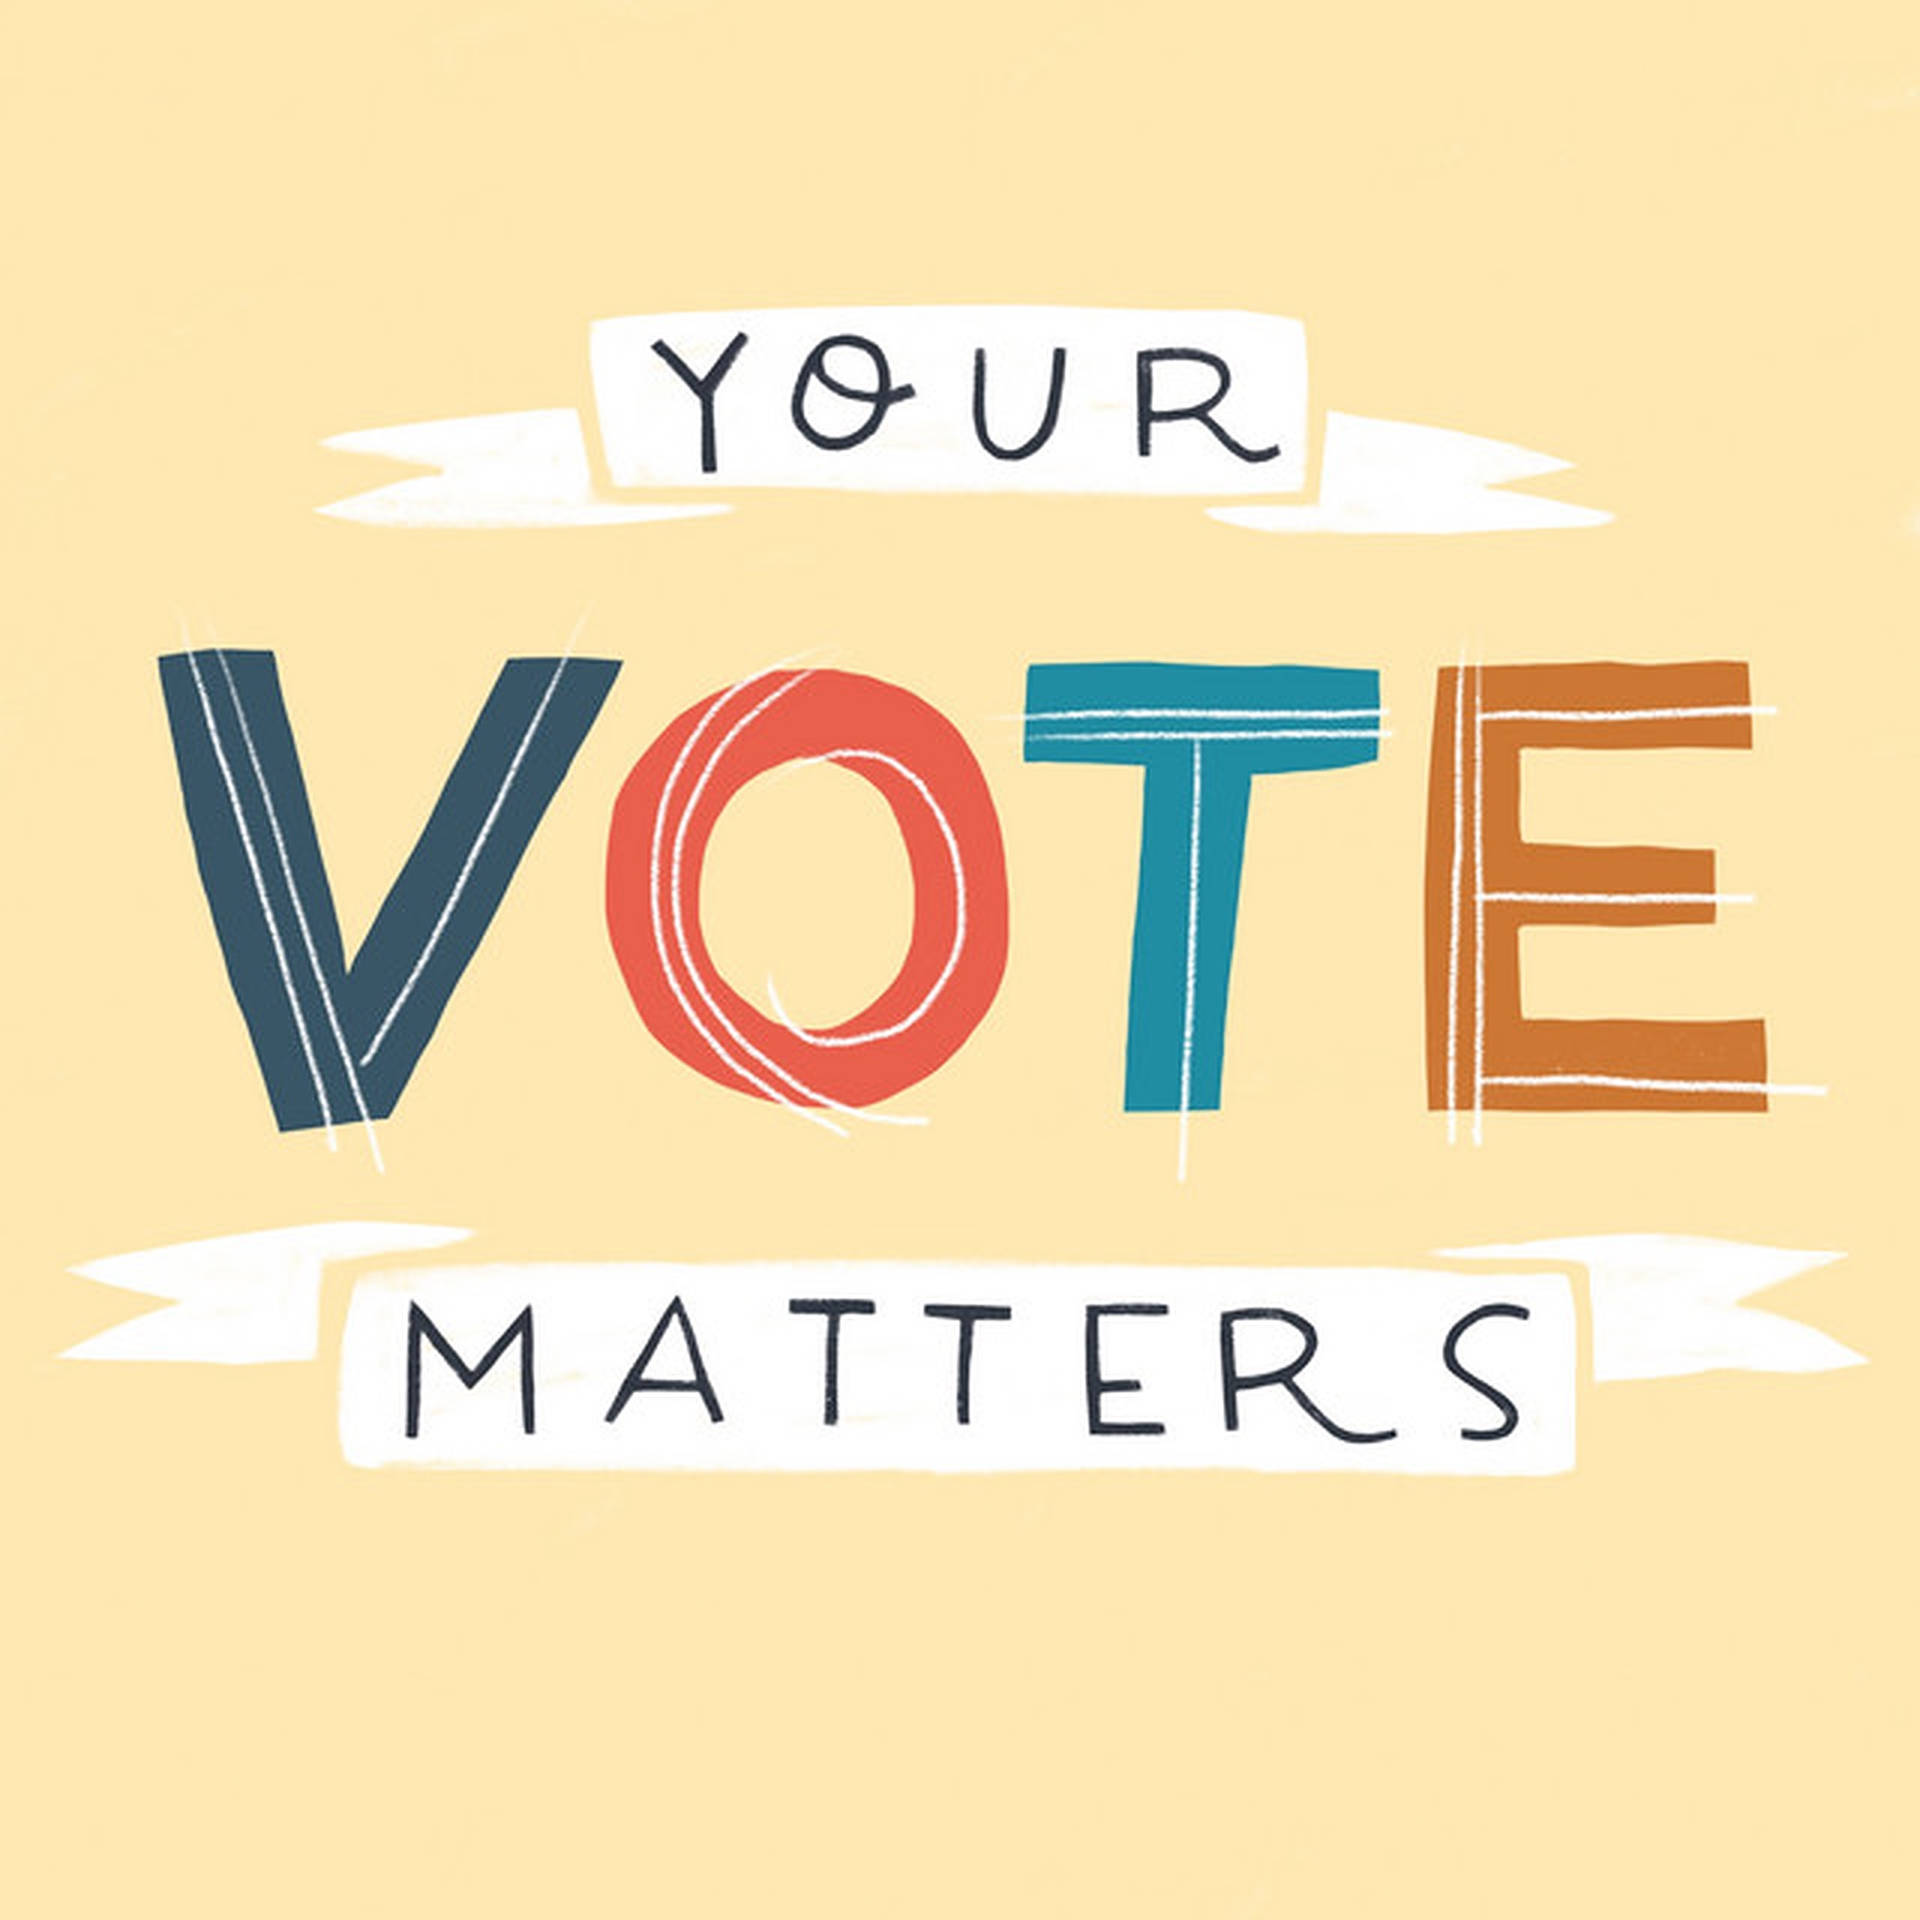 Election Your Vote Matters Background